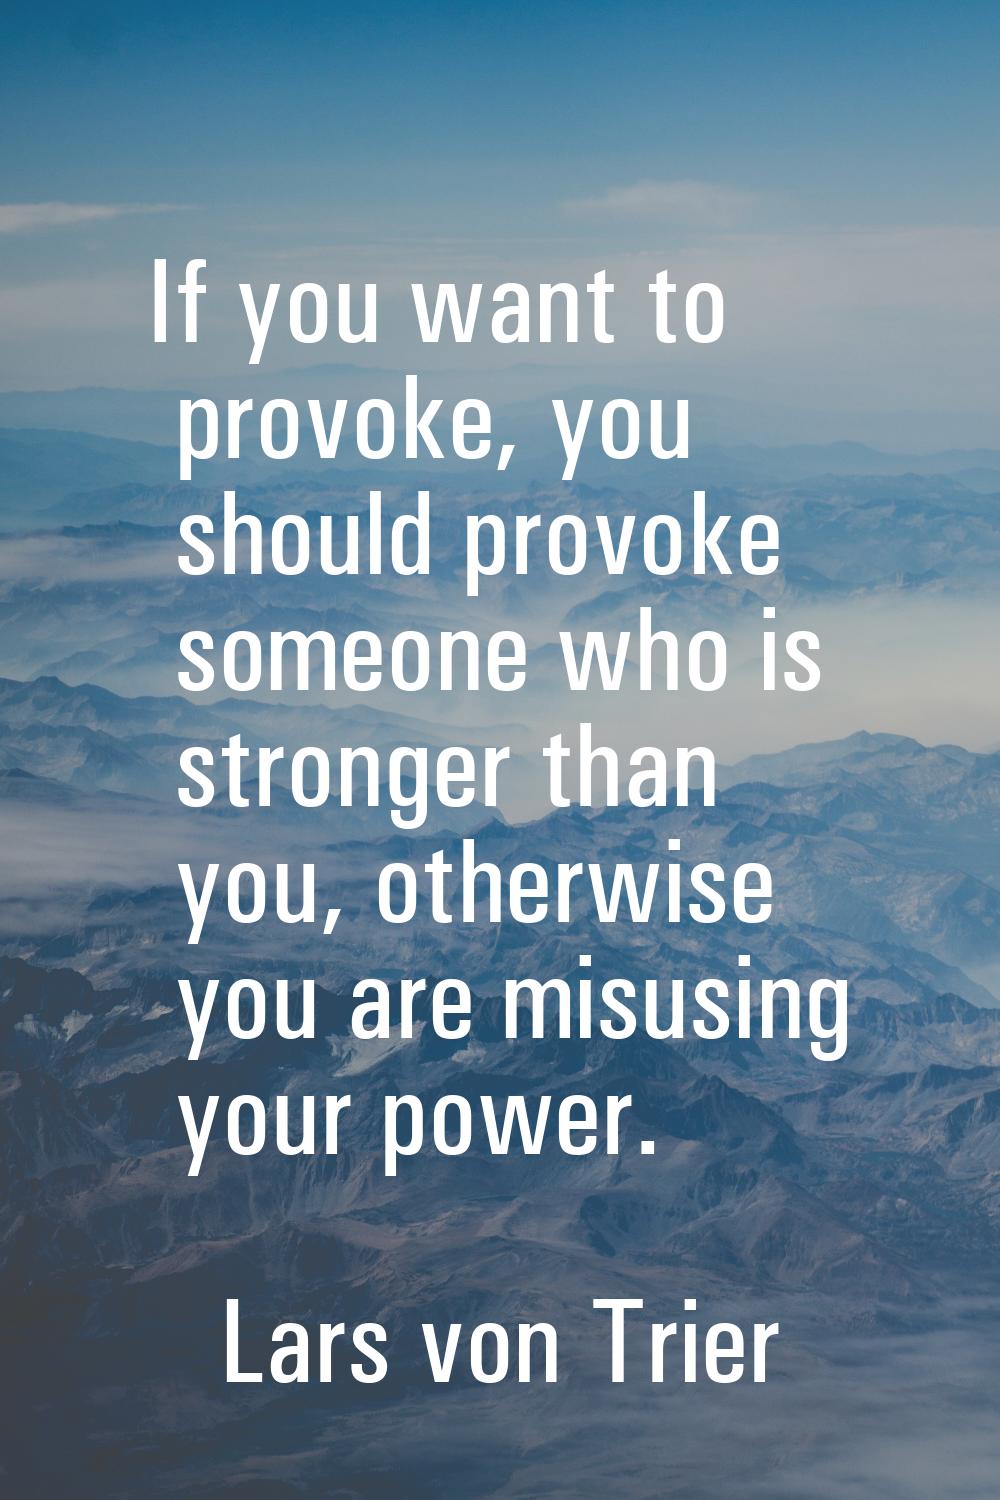 If you want to provoke, you should provoke someone who is stronger than you, otherwise you are misu